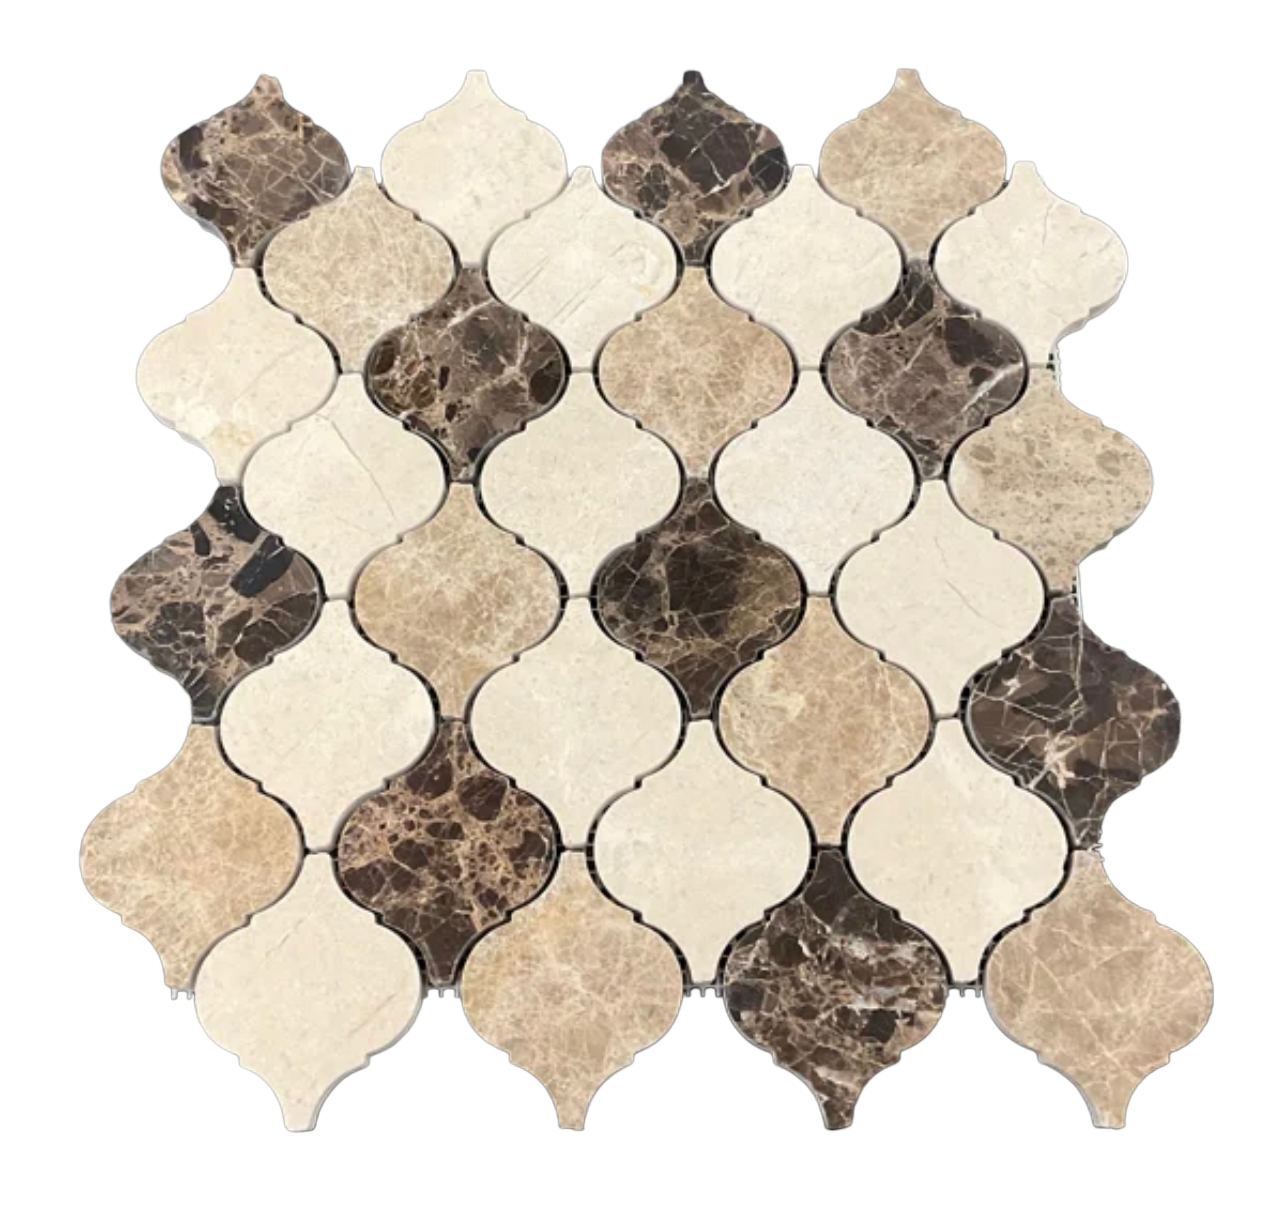 Mix Light and Dark Emperador and Crema Marfil 3 in. Arabesque Lantern Polished Marble Mosaic Floor and Wall Tile for Kitchen Backsplash, Fireplace Surround, Bathroom Wall